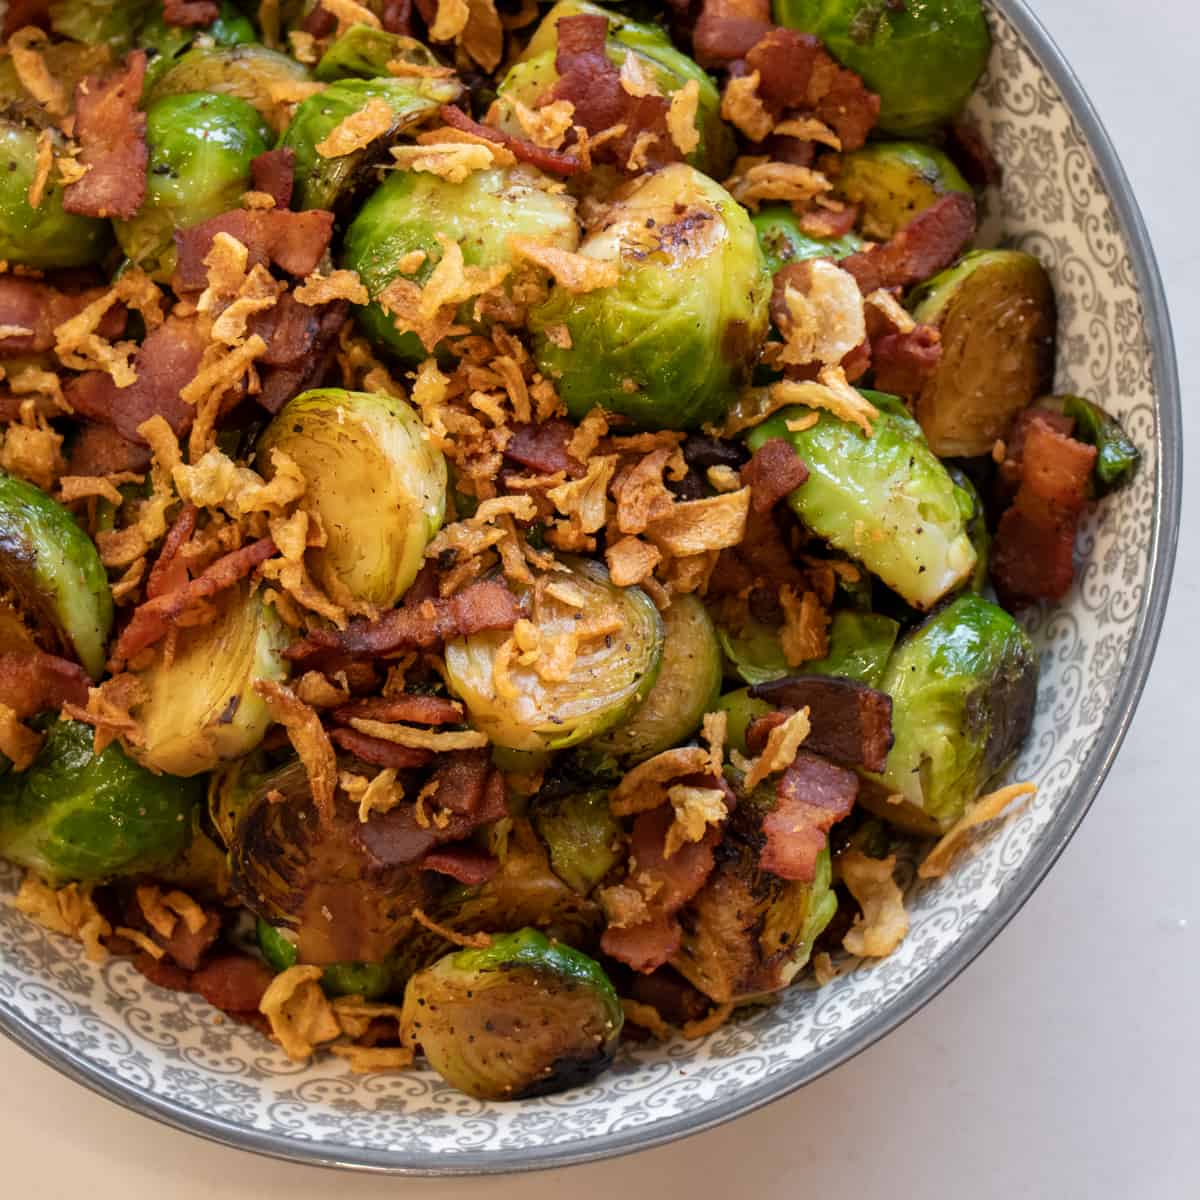 Overhead picture of Brussel's Sprouts, bacon and fried onions.